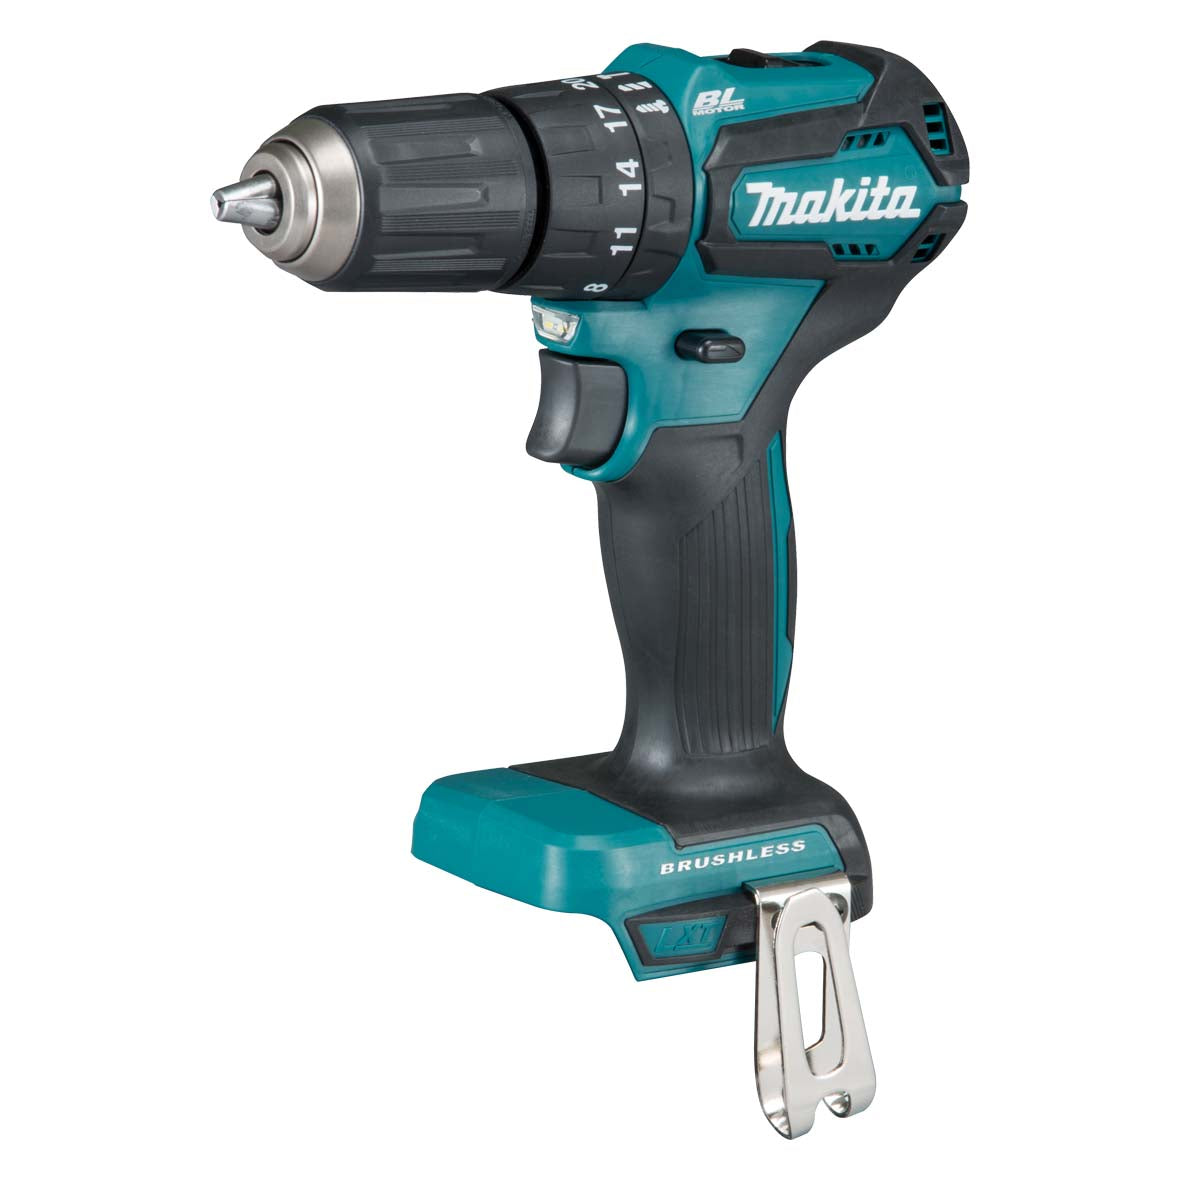 18V Brushless Sub-Compact Hammer Driver Drill Bare (Tool Only) DHP483Z by Makita